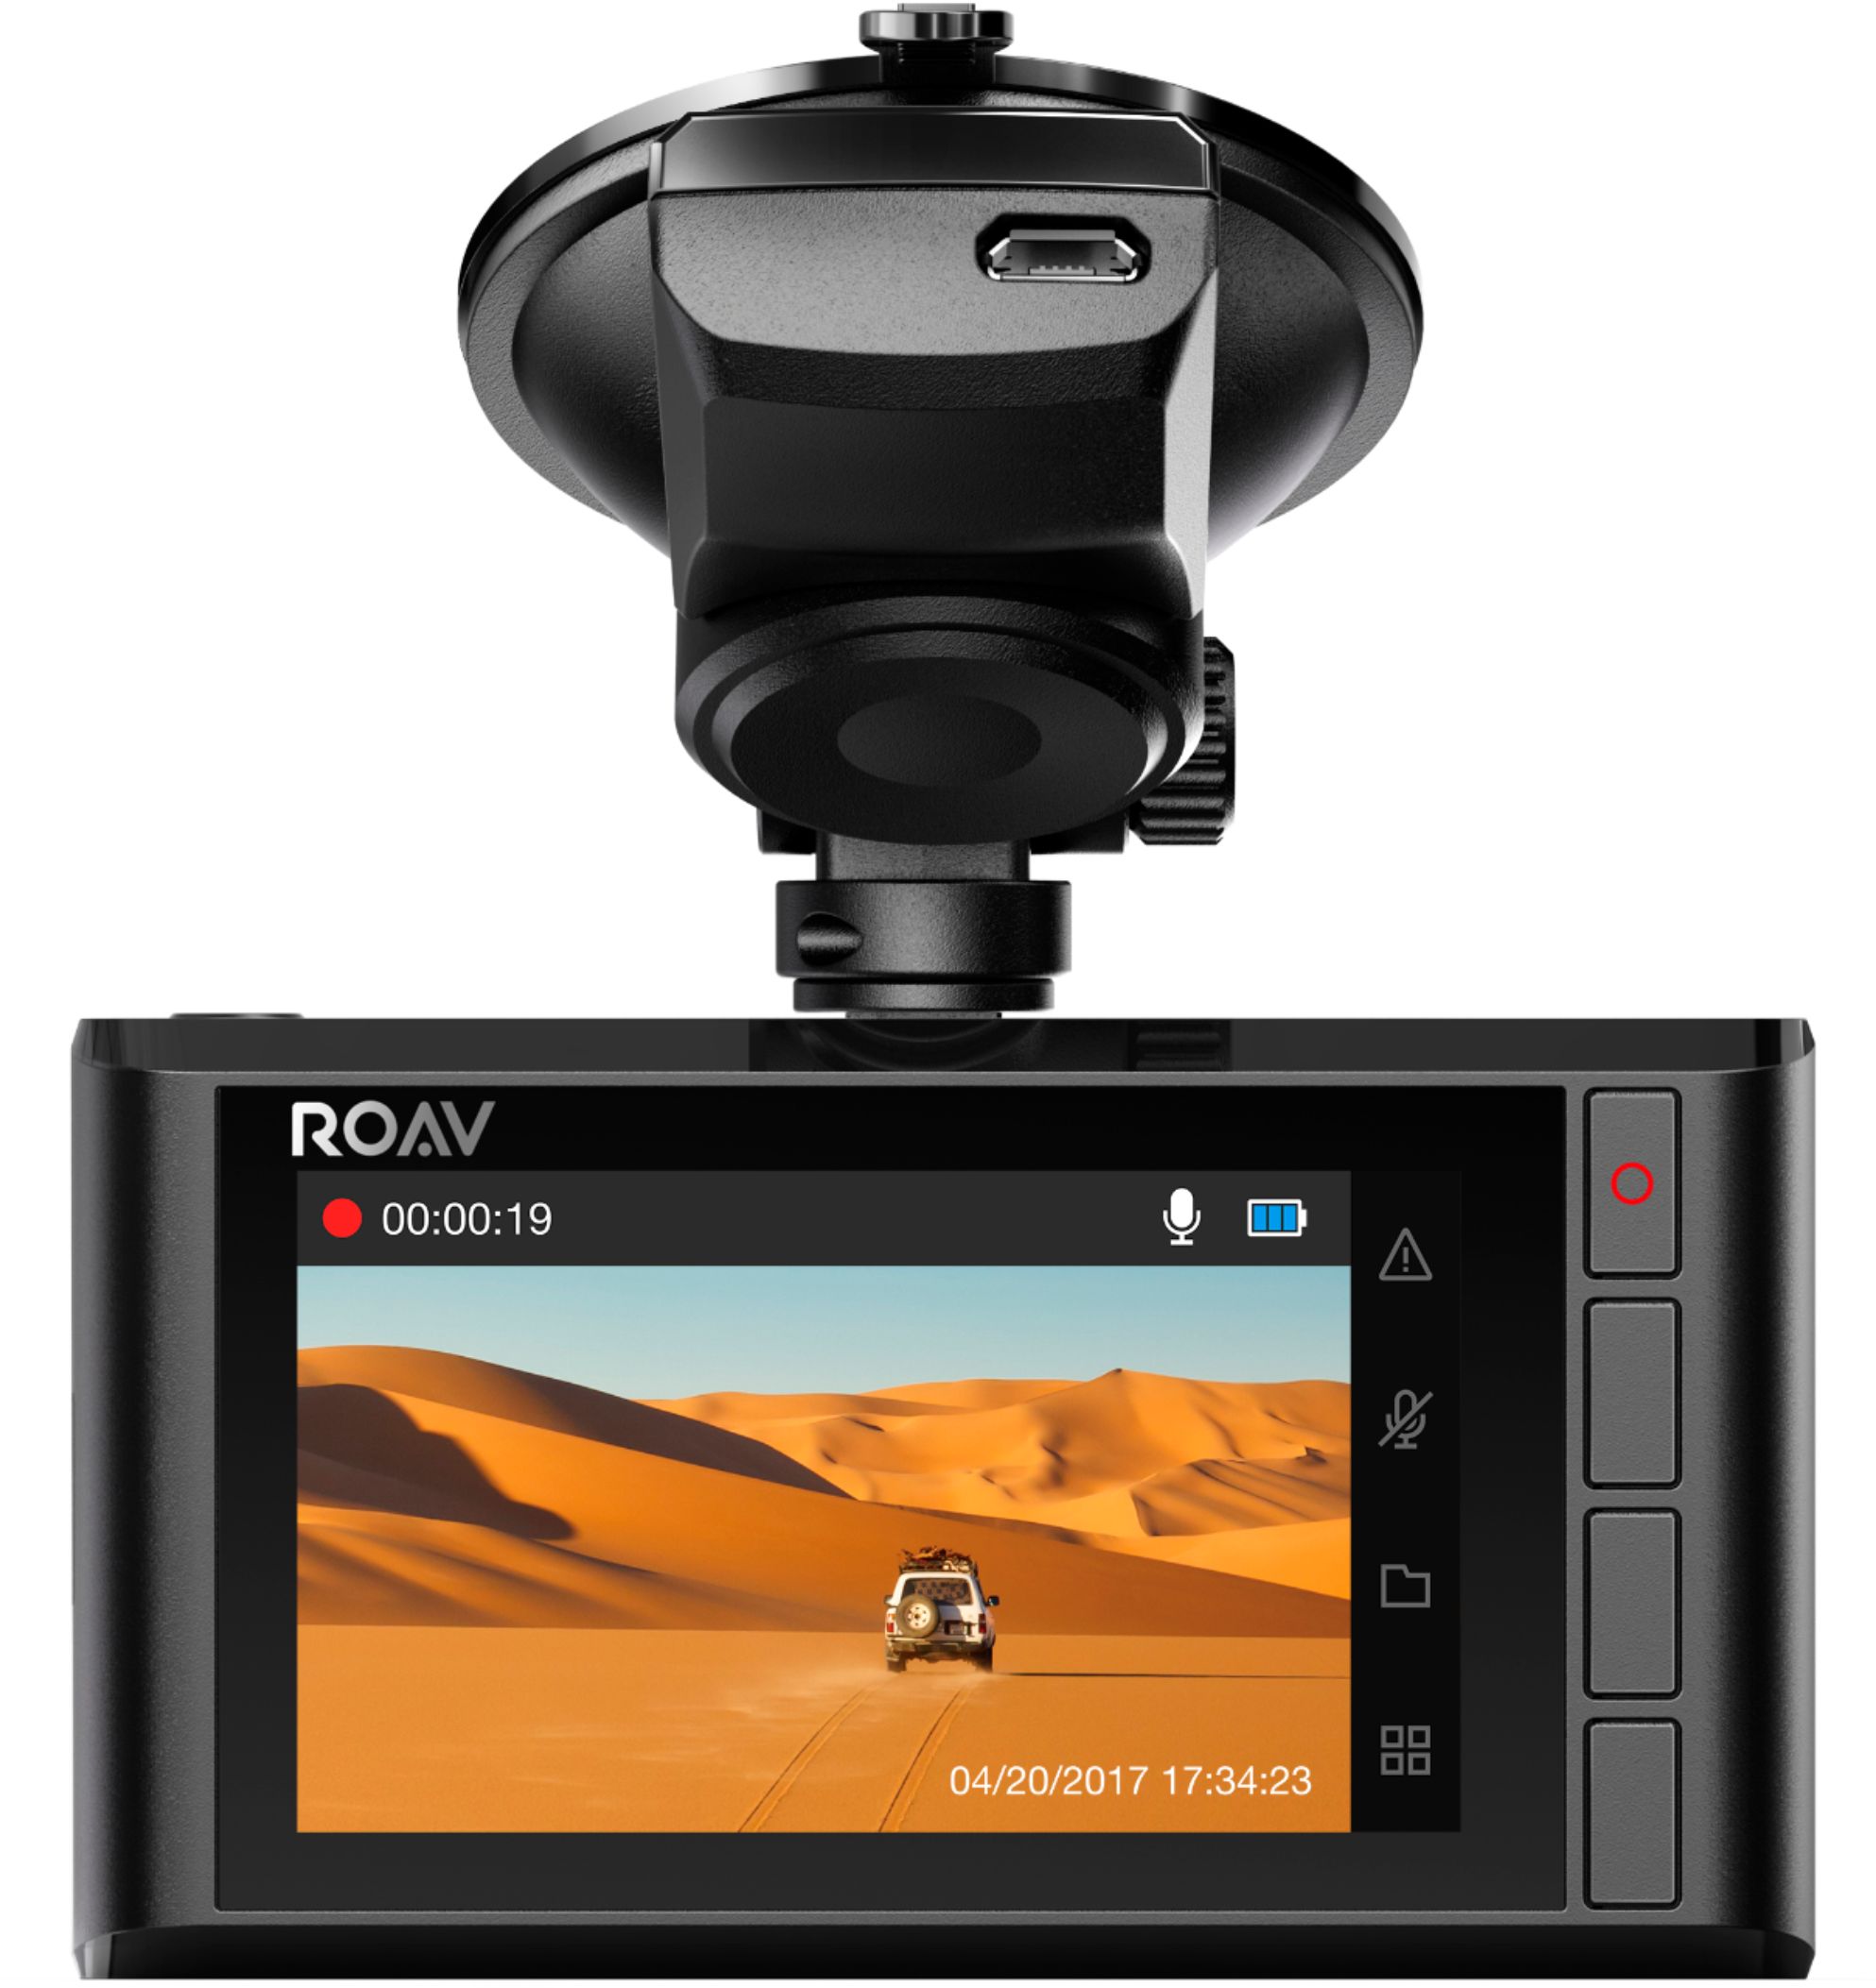 Anker's Roav C1 Dash Cam falls to lowest price this year at $52